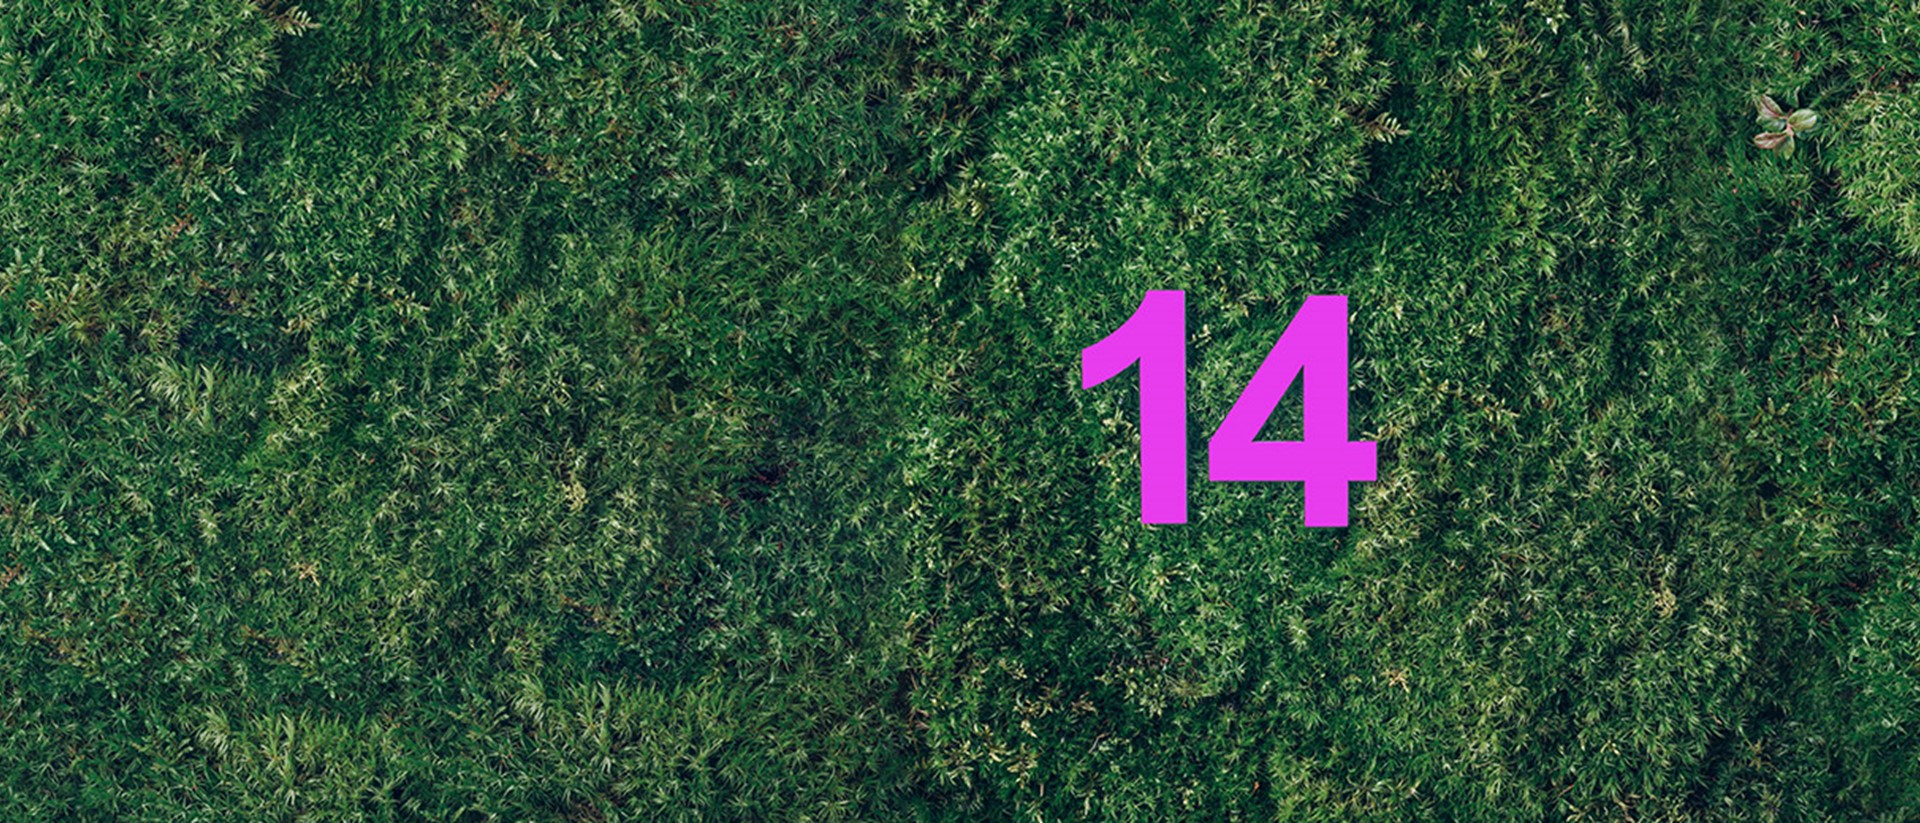 Image of a purple coloured number 14 laying on green grass